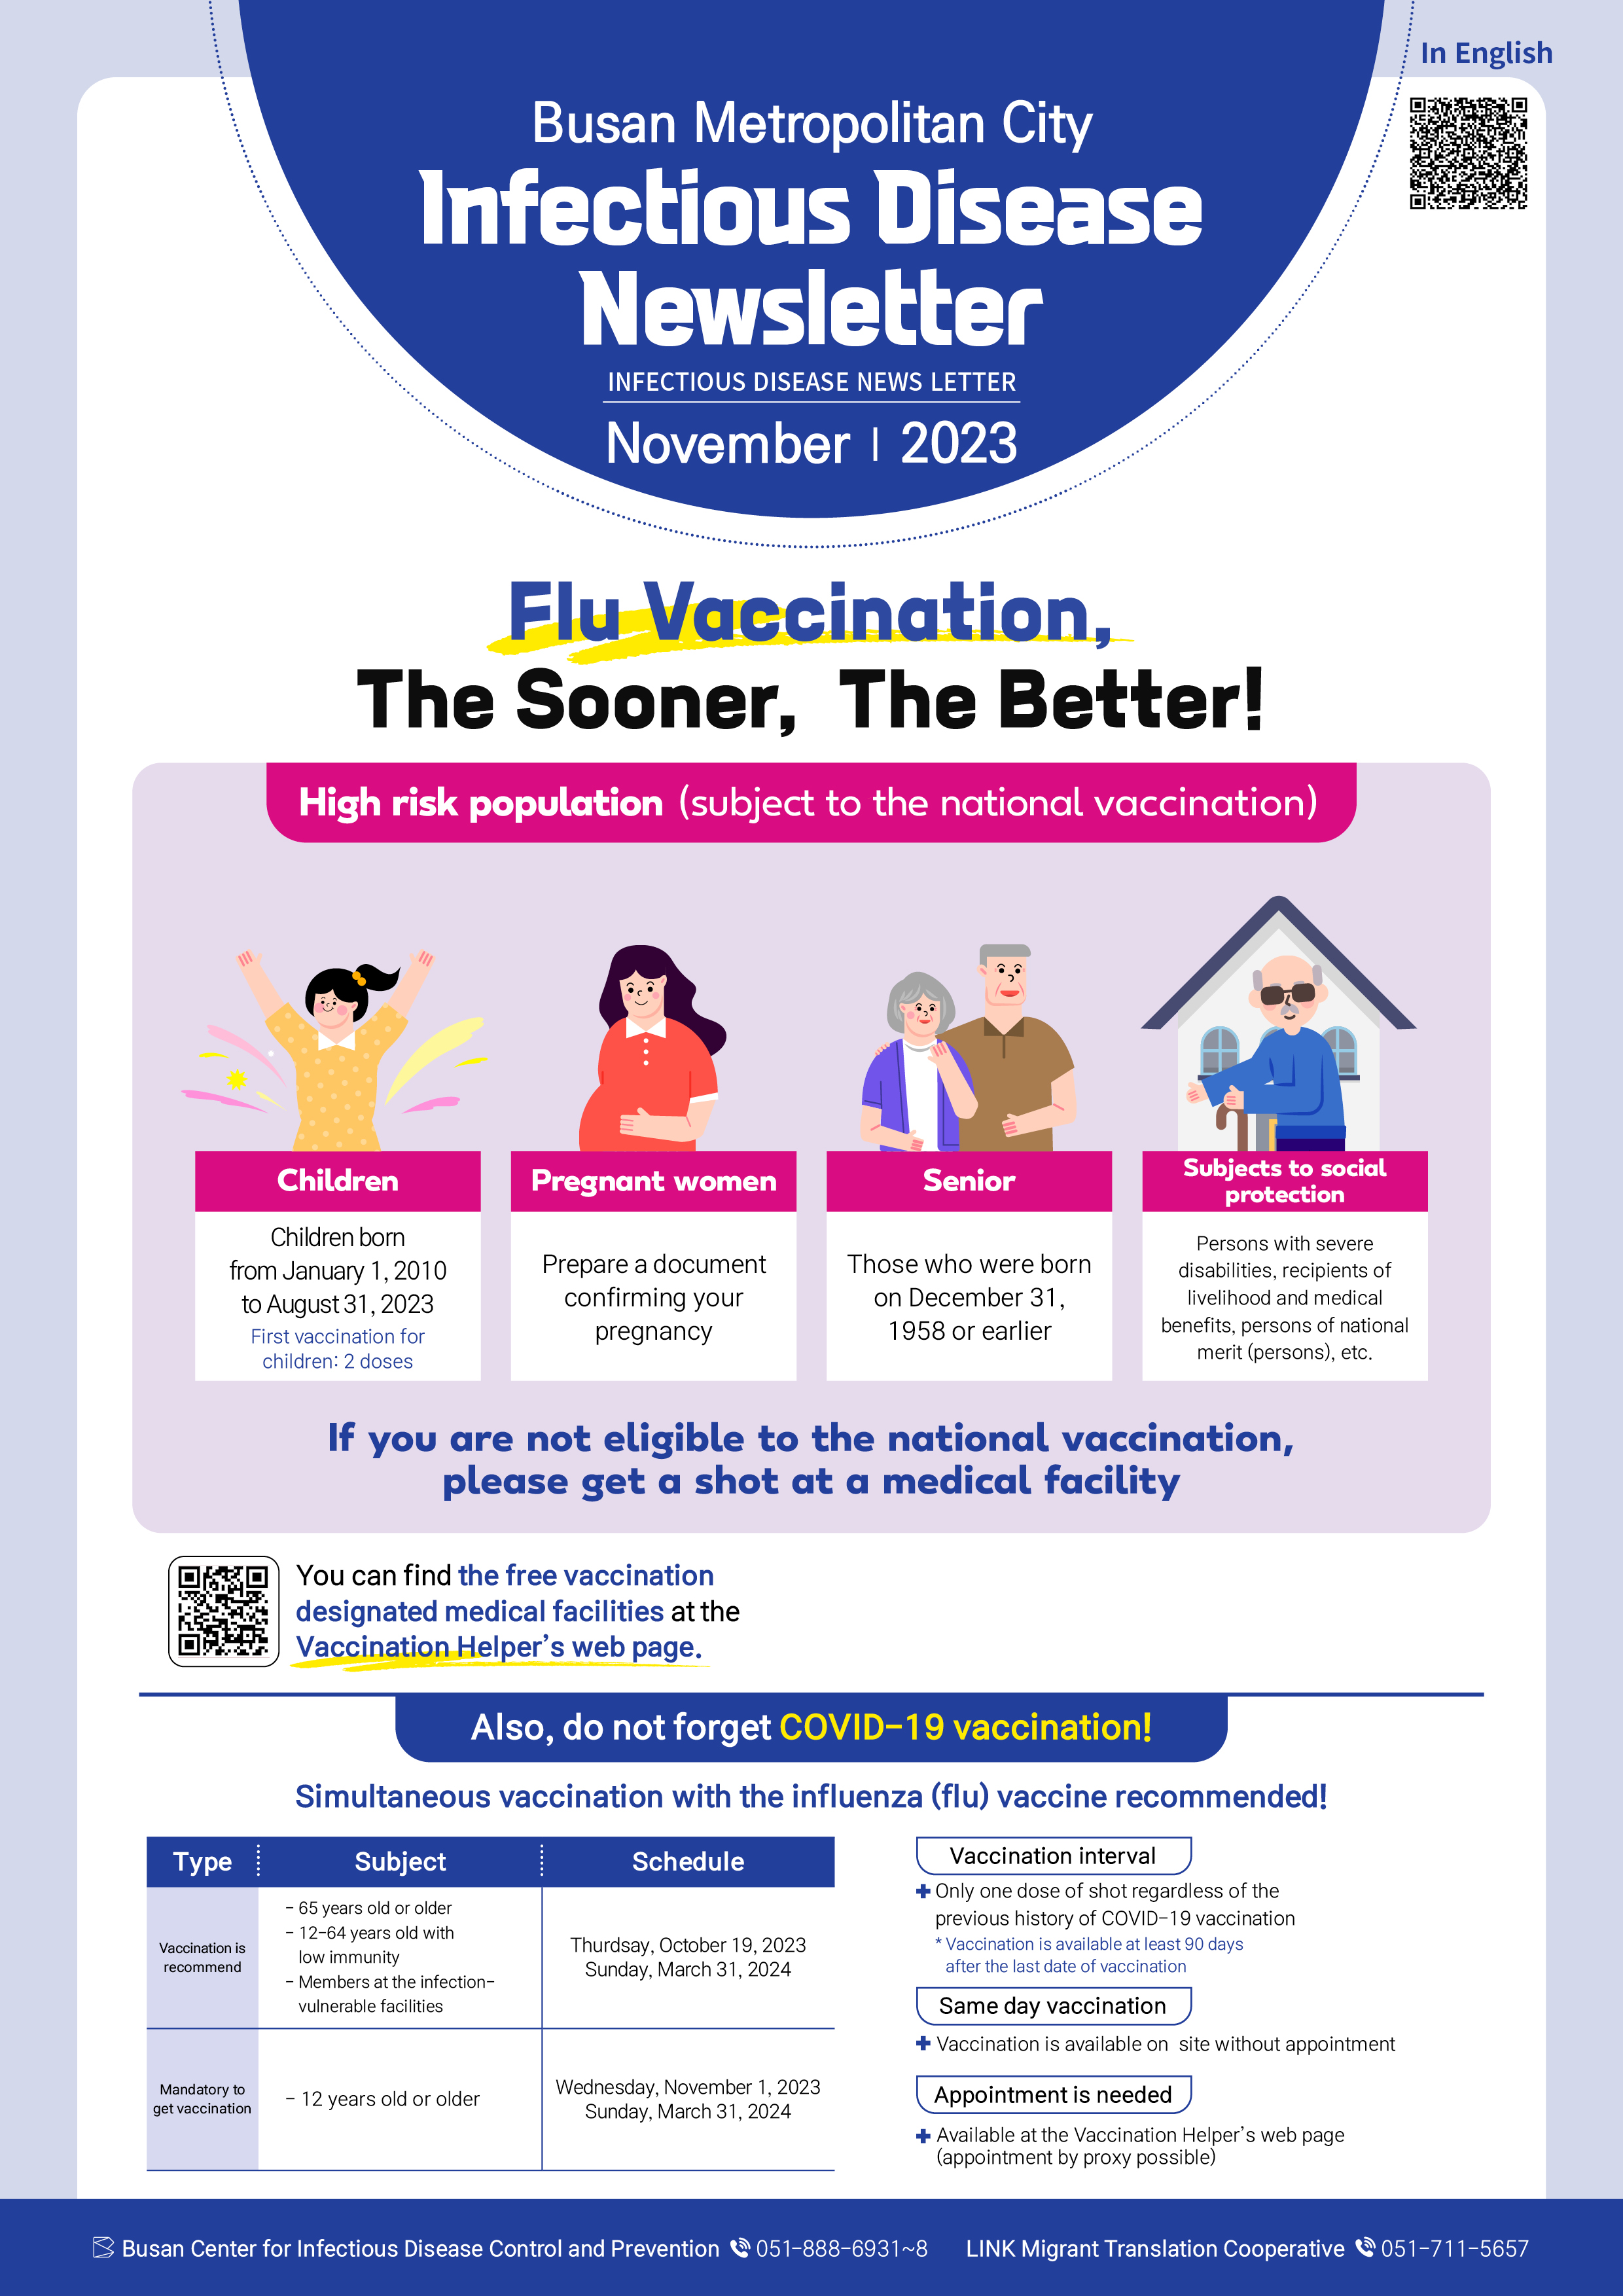 Busan Metropolitan City
Infectious Disease Newsletter
November | 2023
Flu Vaccination, the Sooner  the Better!
High risk population (subject to the national vaccination)
Children: Children born 
from January 1, 2010 
to August 31, 2023

First vaccination for children: 2 doses
Pregnant women: Prepare a document confirming your pregnancy
Senior: Those who were born on December 31, 1958 or earlier
Subjects to social protection: Persons with severe disabilities, recipients of livelihood and medical benefits, persons of national merit (persons), etc.
If you are not eligible to the national vaccination, please get a shot at a medical facility
You can find the free vaccination designated medical facilities at the Vaccination Helper’s web page. (QR code)
+
Also, do not forget COVID-19 vaccination!
Simultaneous vaccination with the influenza (flu) vaccine recommended!
Vaccination is recommended
- 65 years old or older
- 12-64 years old with low immunity
- Members at the infection-vulnerable facilities
- Thurdsay, October 19, 2023 – Sunday, March 31, 2024
Mandatory to get vaccination
- 12 years old or older
- Wednesday, November 1, 2023 – Sunday, March 31, 2024
Vaccination interval
- Only one dose of shot regardless of the previous history of COVID-19 vaccination
 * Vaccination is available at least 90 days after the last date of vaccination 
Same day vaccination
- Vaccination is available on  site without appointment
Appointment is needed
- Available at the Vaccination Helper’s web page (appointment by proxy possible)
Infectious Disease Control Support Division 888-6931~8, Department of Infectious Disease Management 888-3321~7, 3726 사진0